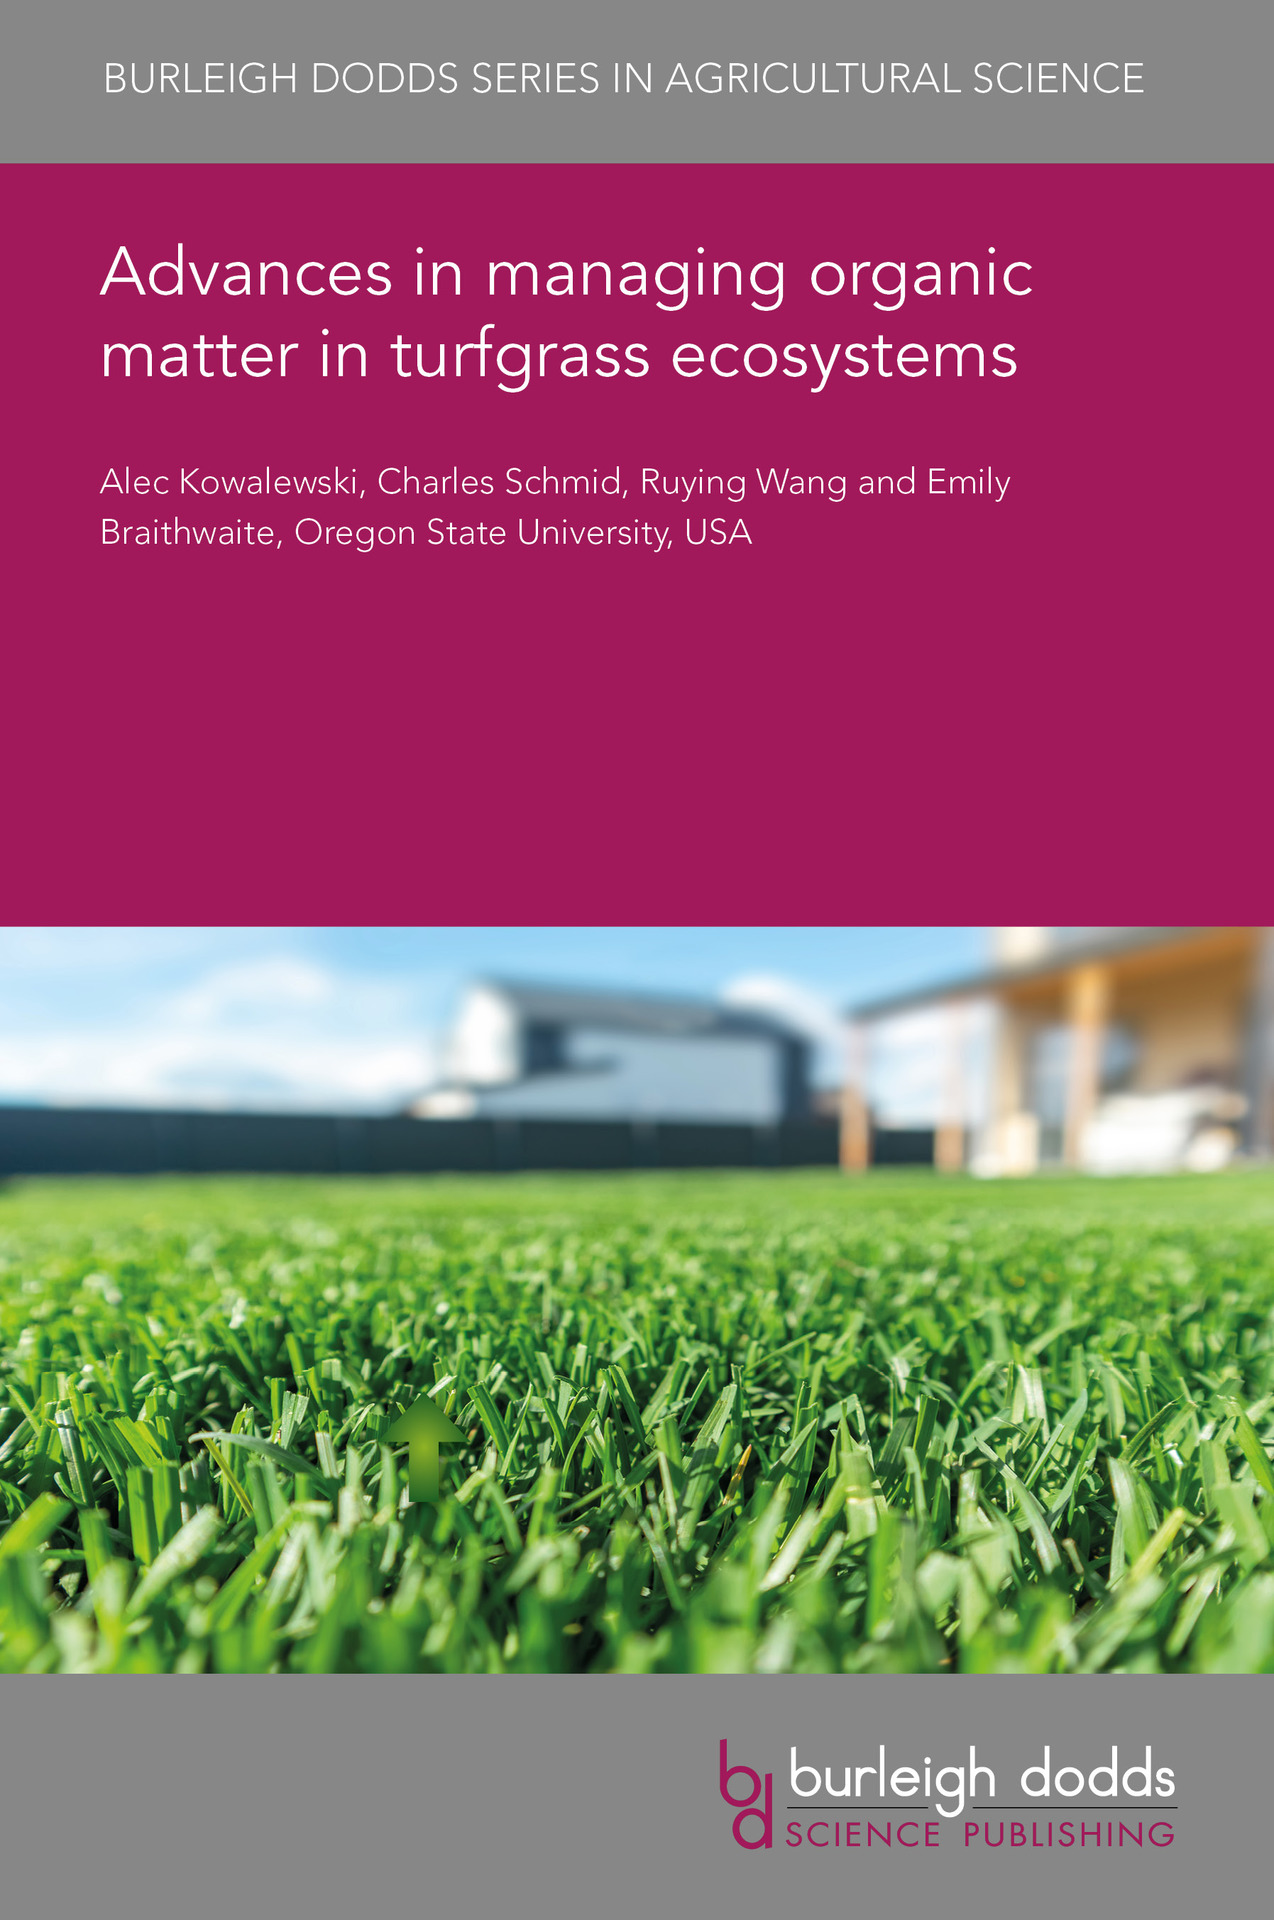 Advances in managing organic matter in turfgrass ecosystems